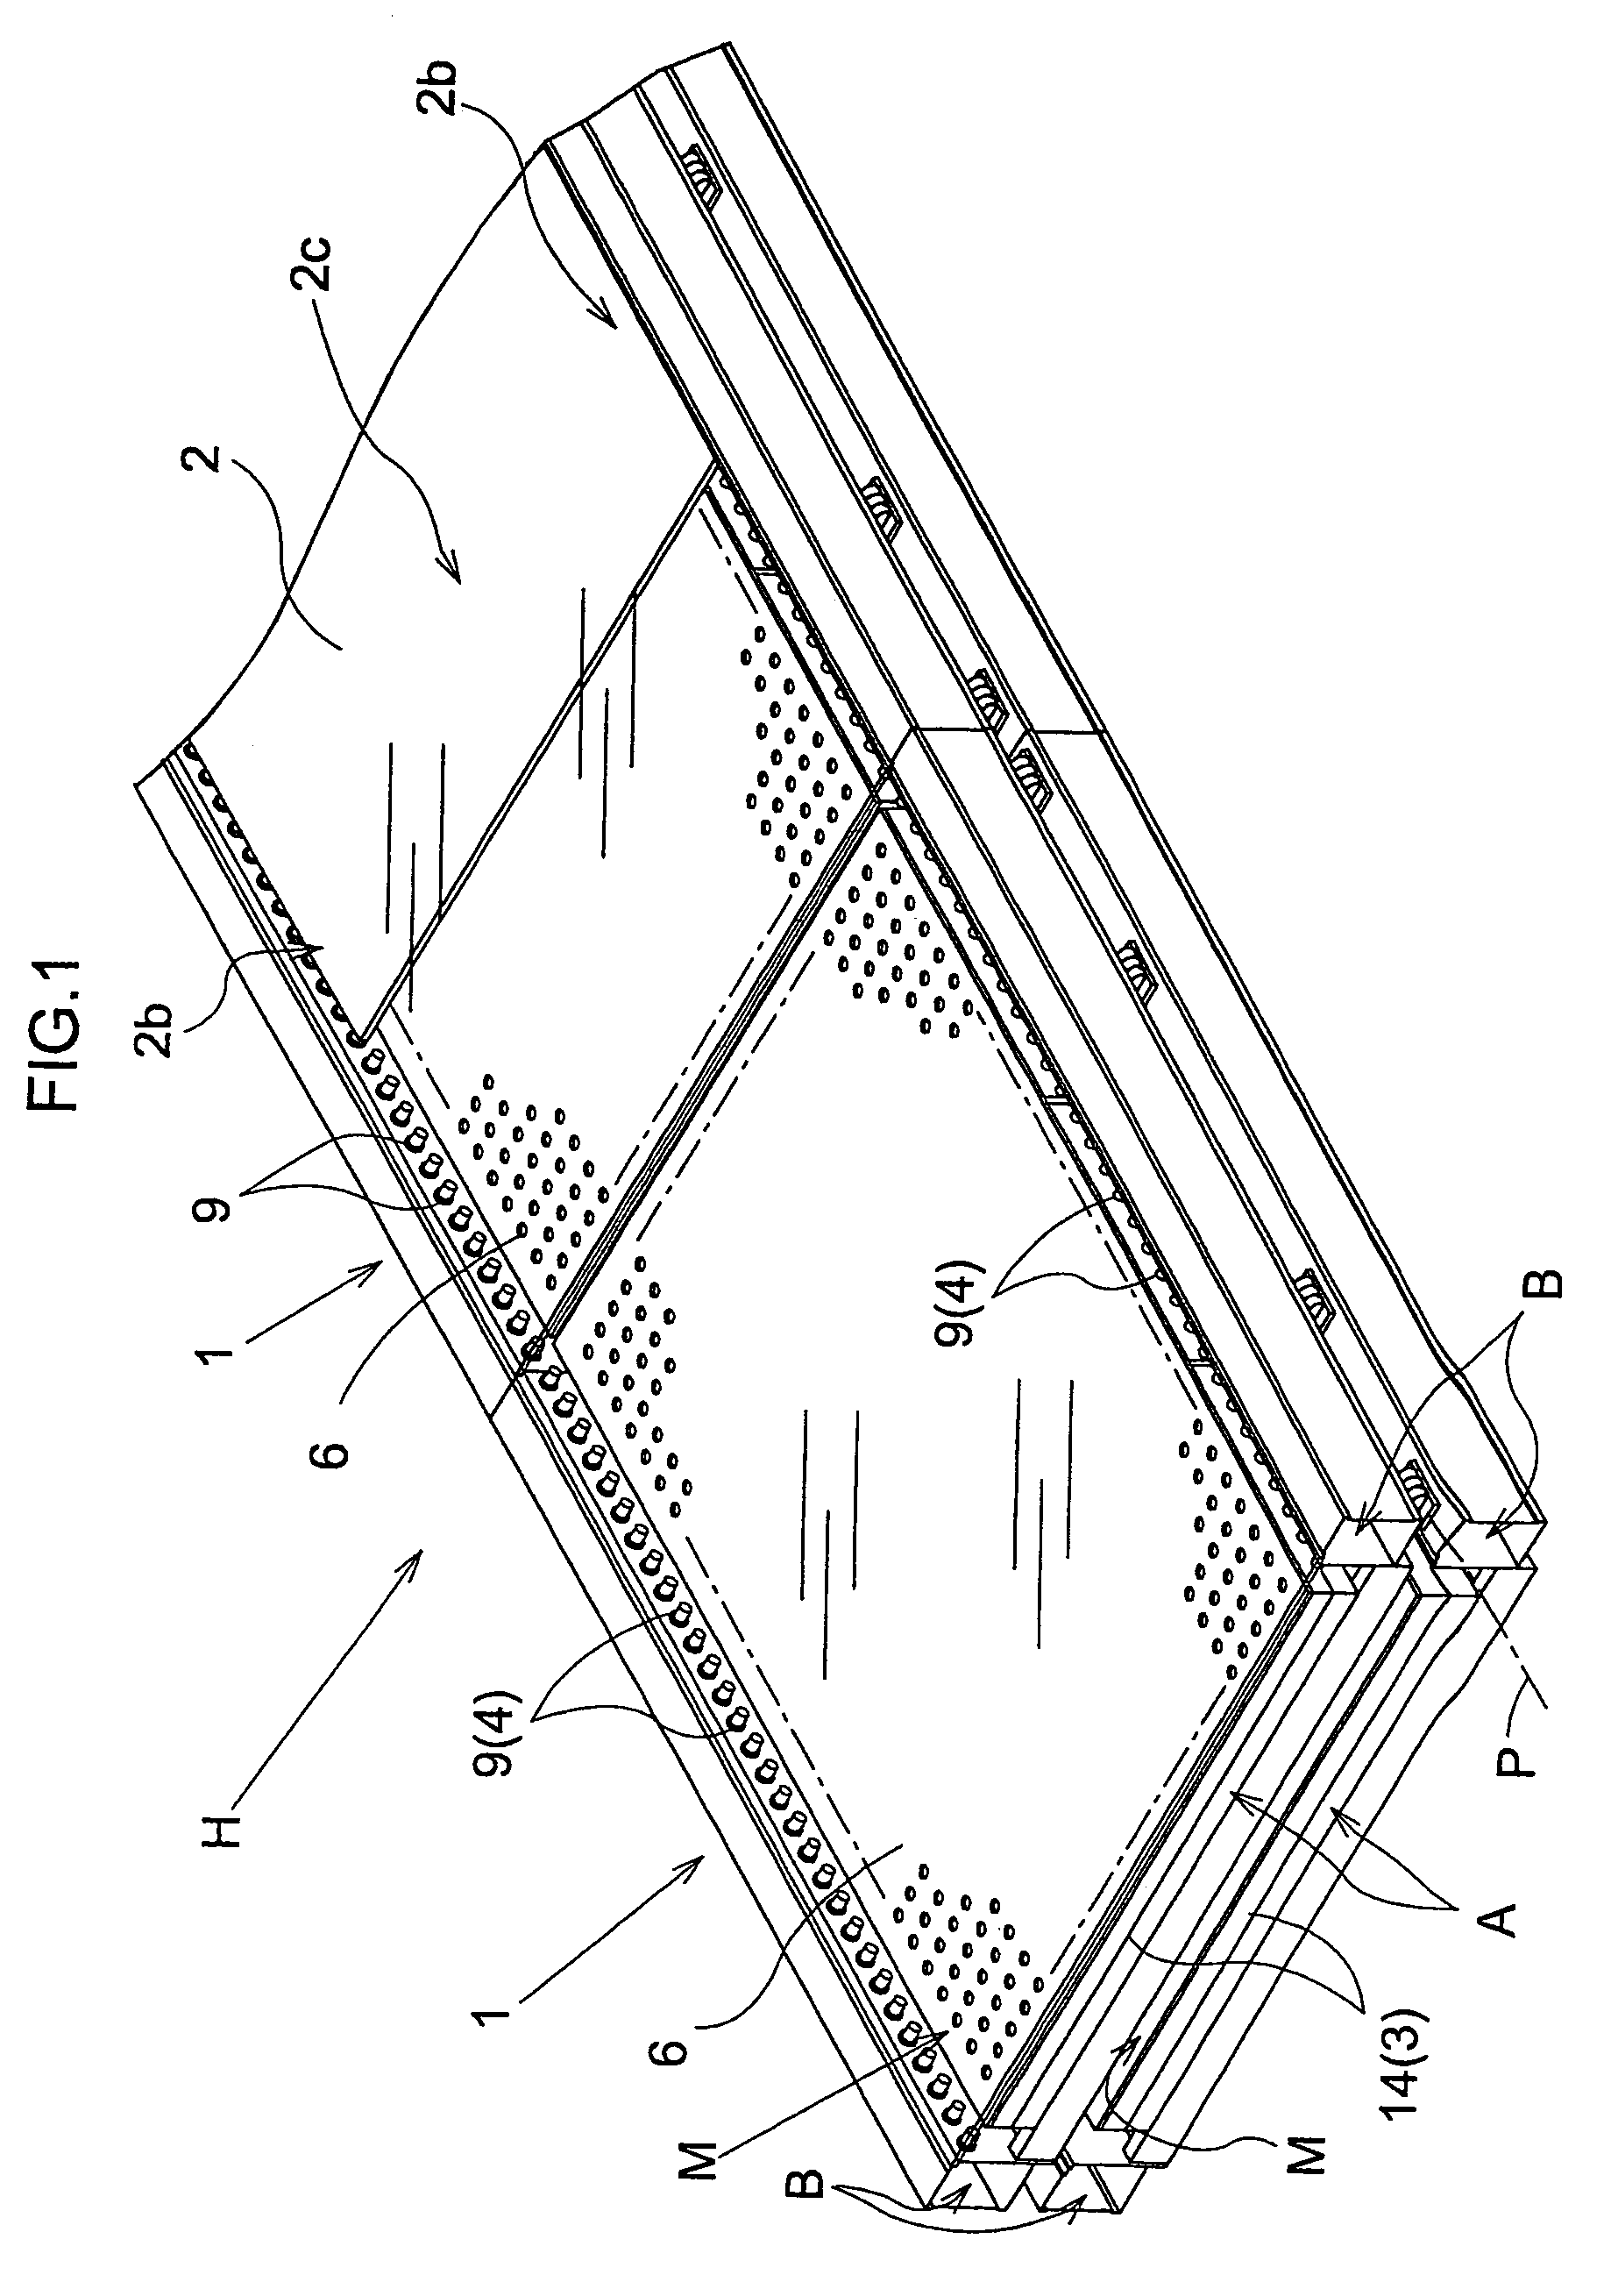 Plate-shaped work piece transporting apparatus